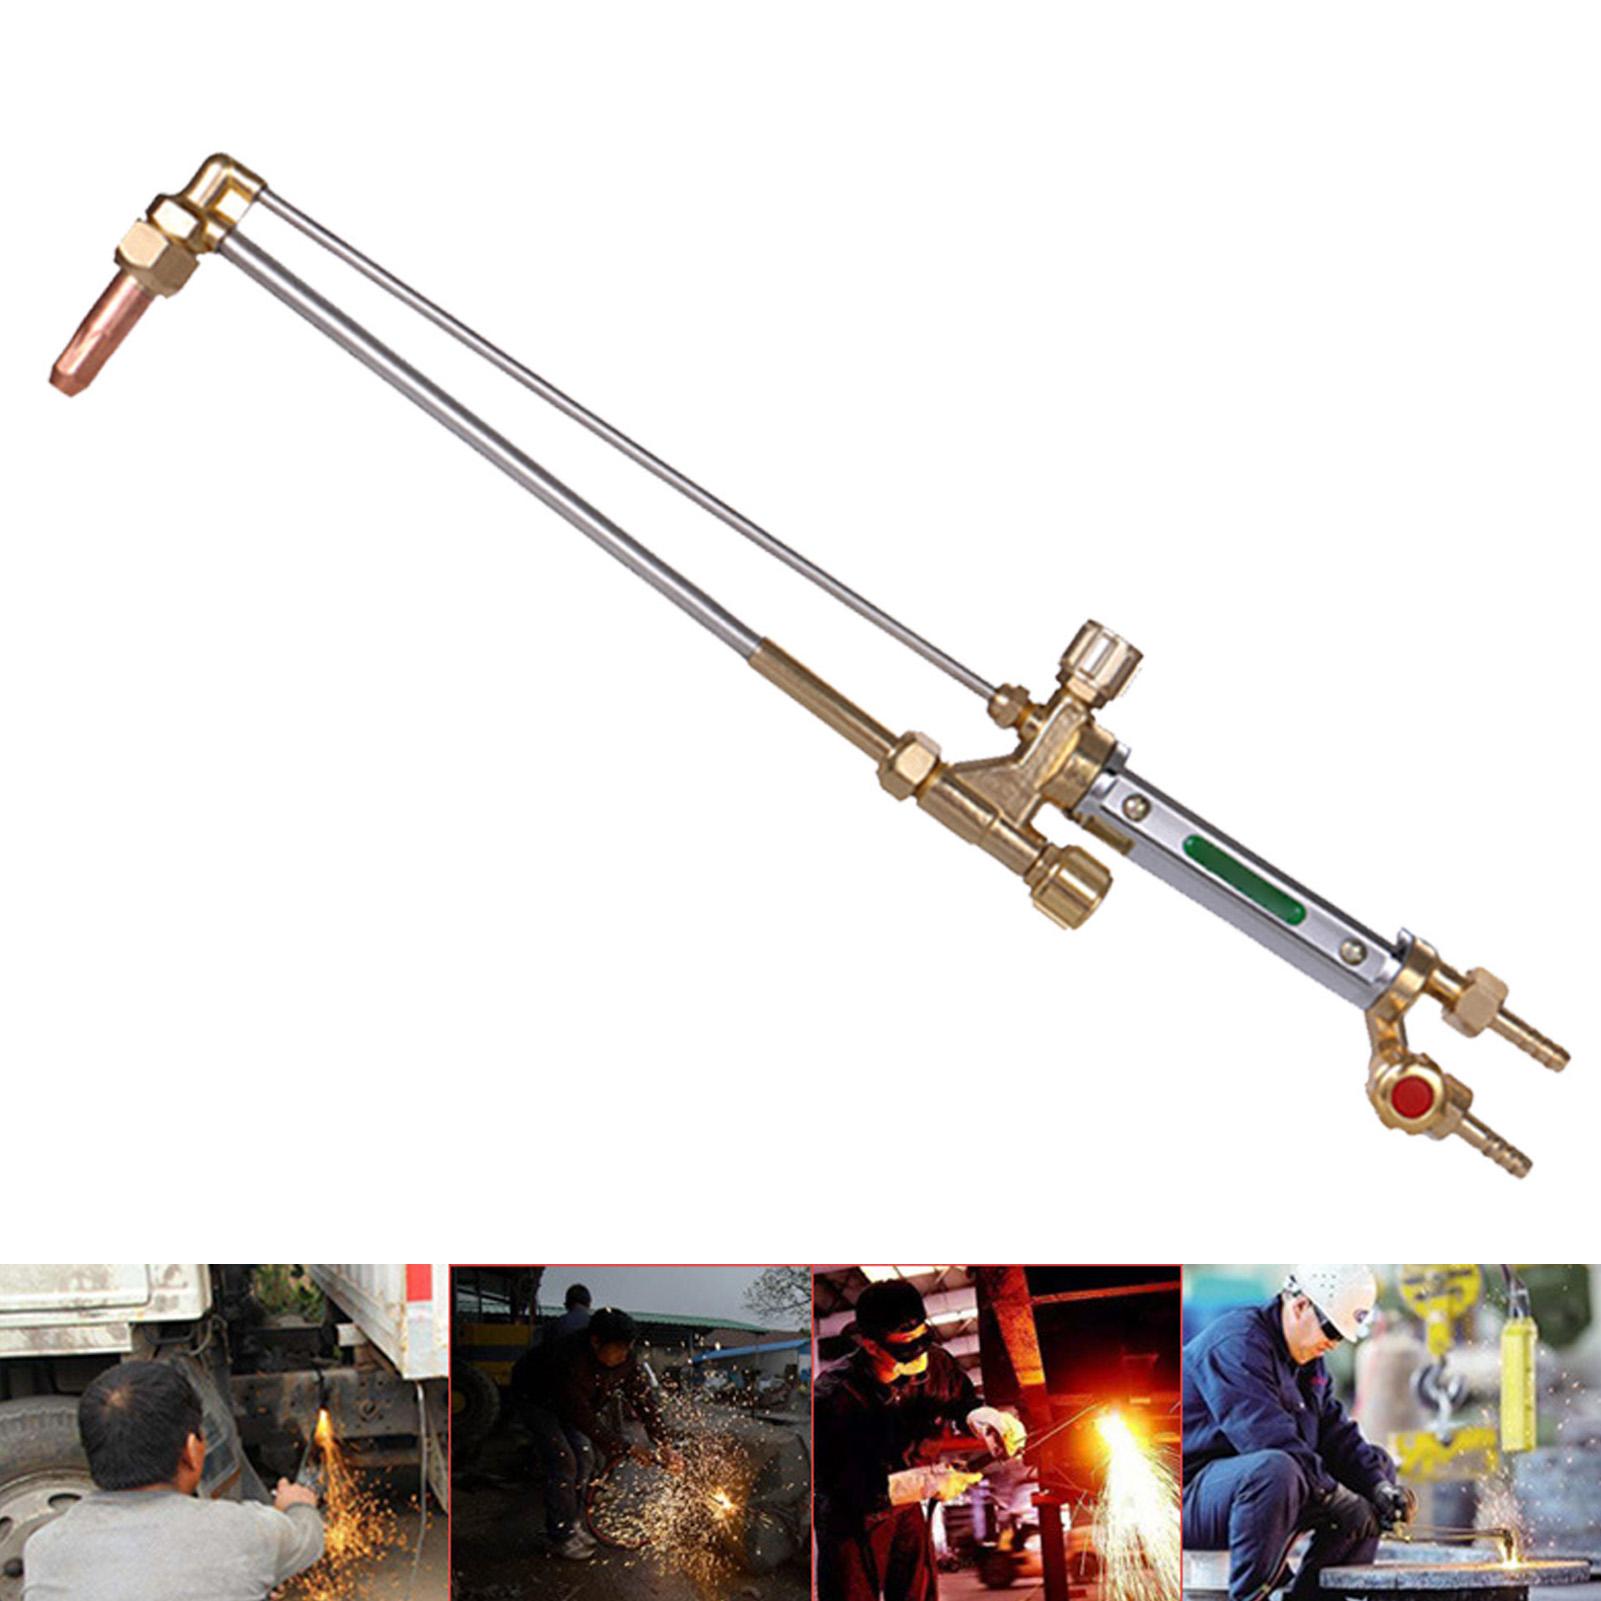 G01 30/100 Stainless Steel Oxy-fuel Cutting Torch Soldering Propane Gas Flame Blow Plunber Roofing with Check Valves Hand Tool